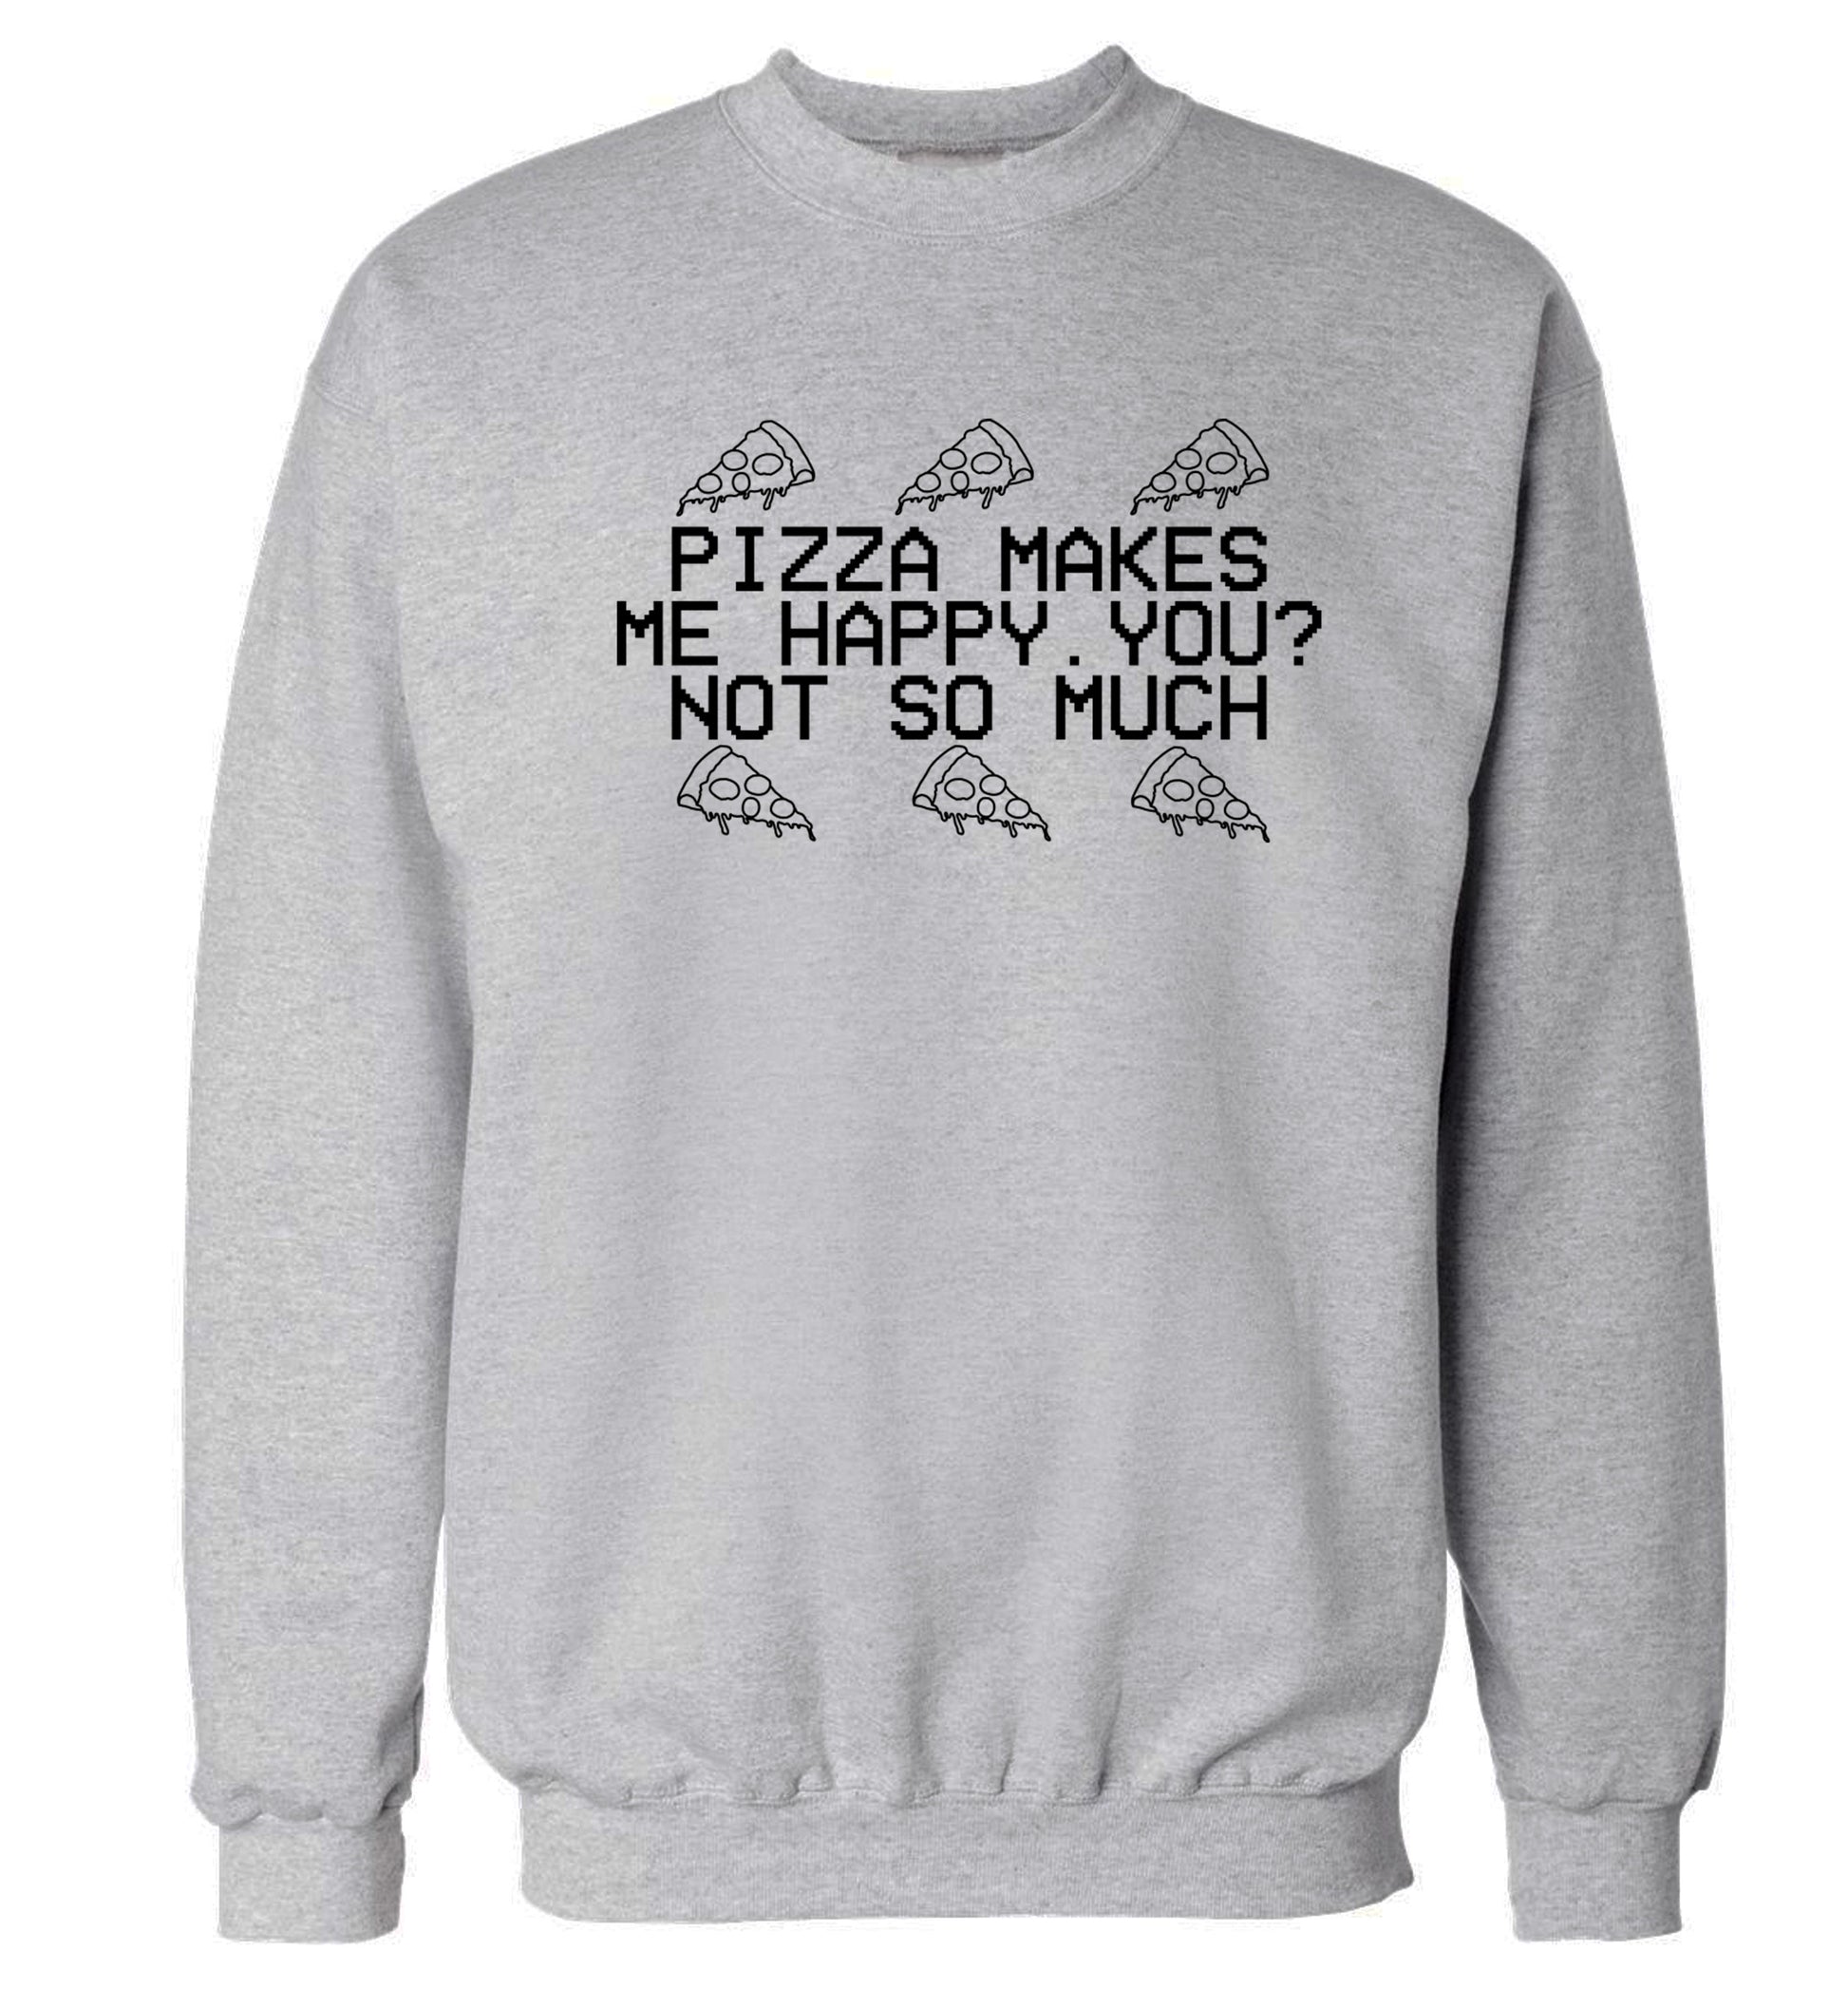 Pizza makes me happy, You? Not so much Adult's unisex grey  sweater 2XL